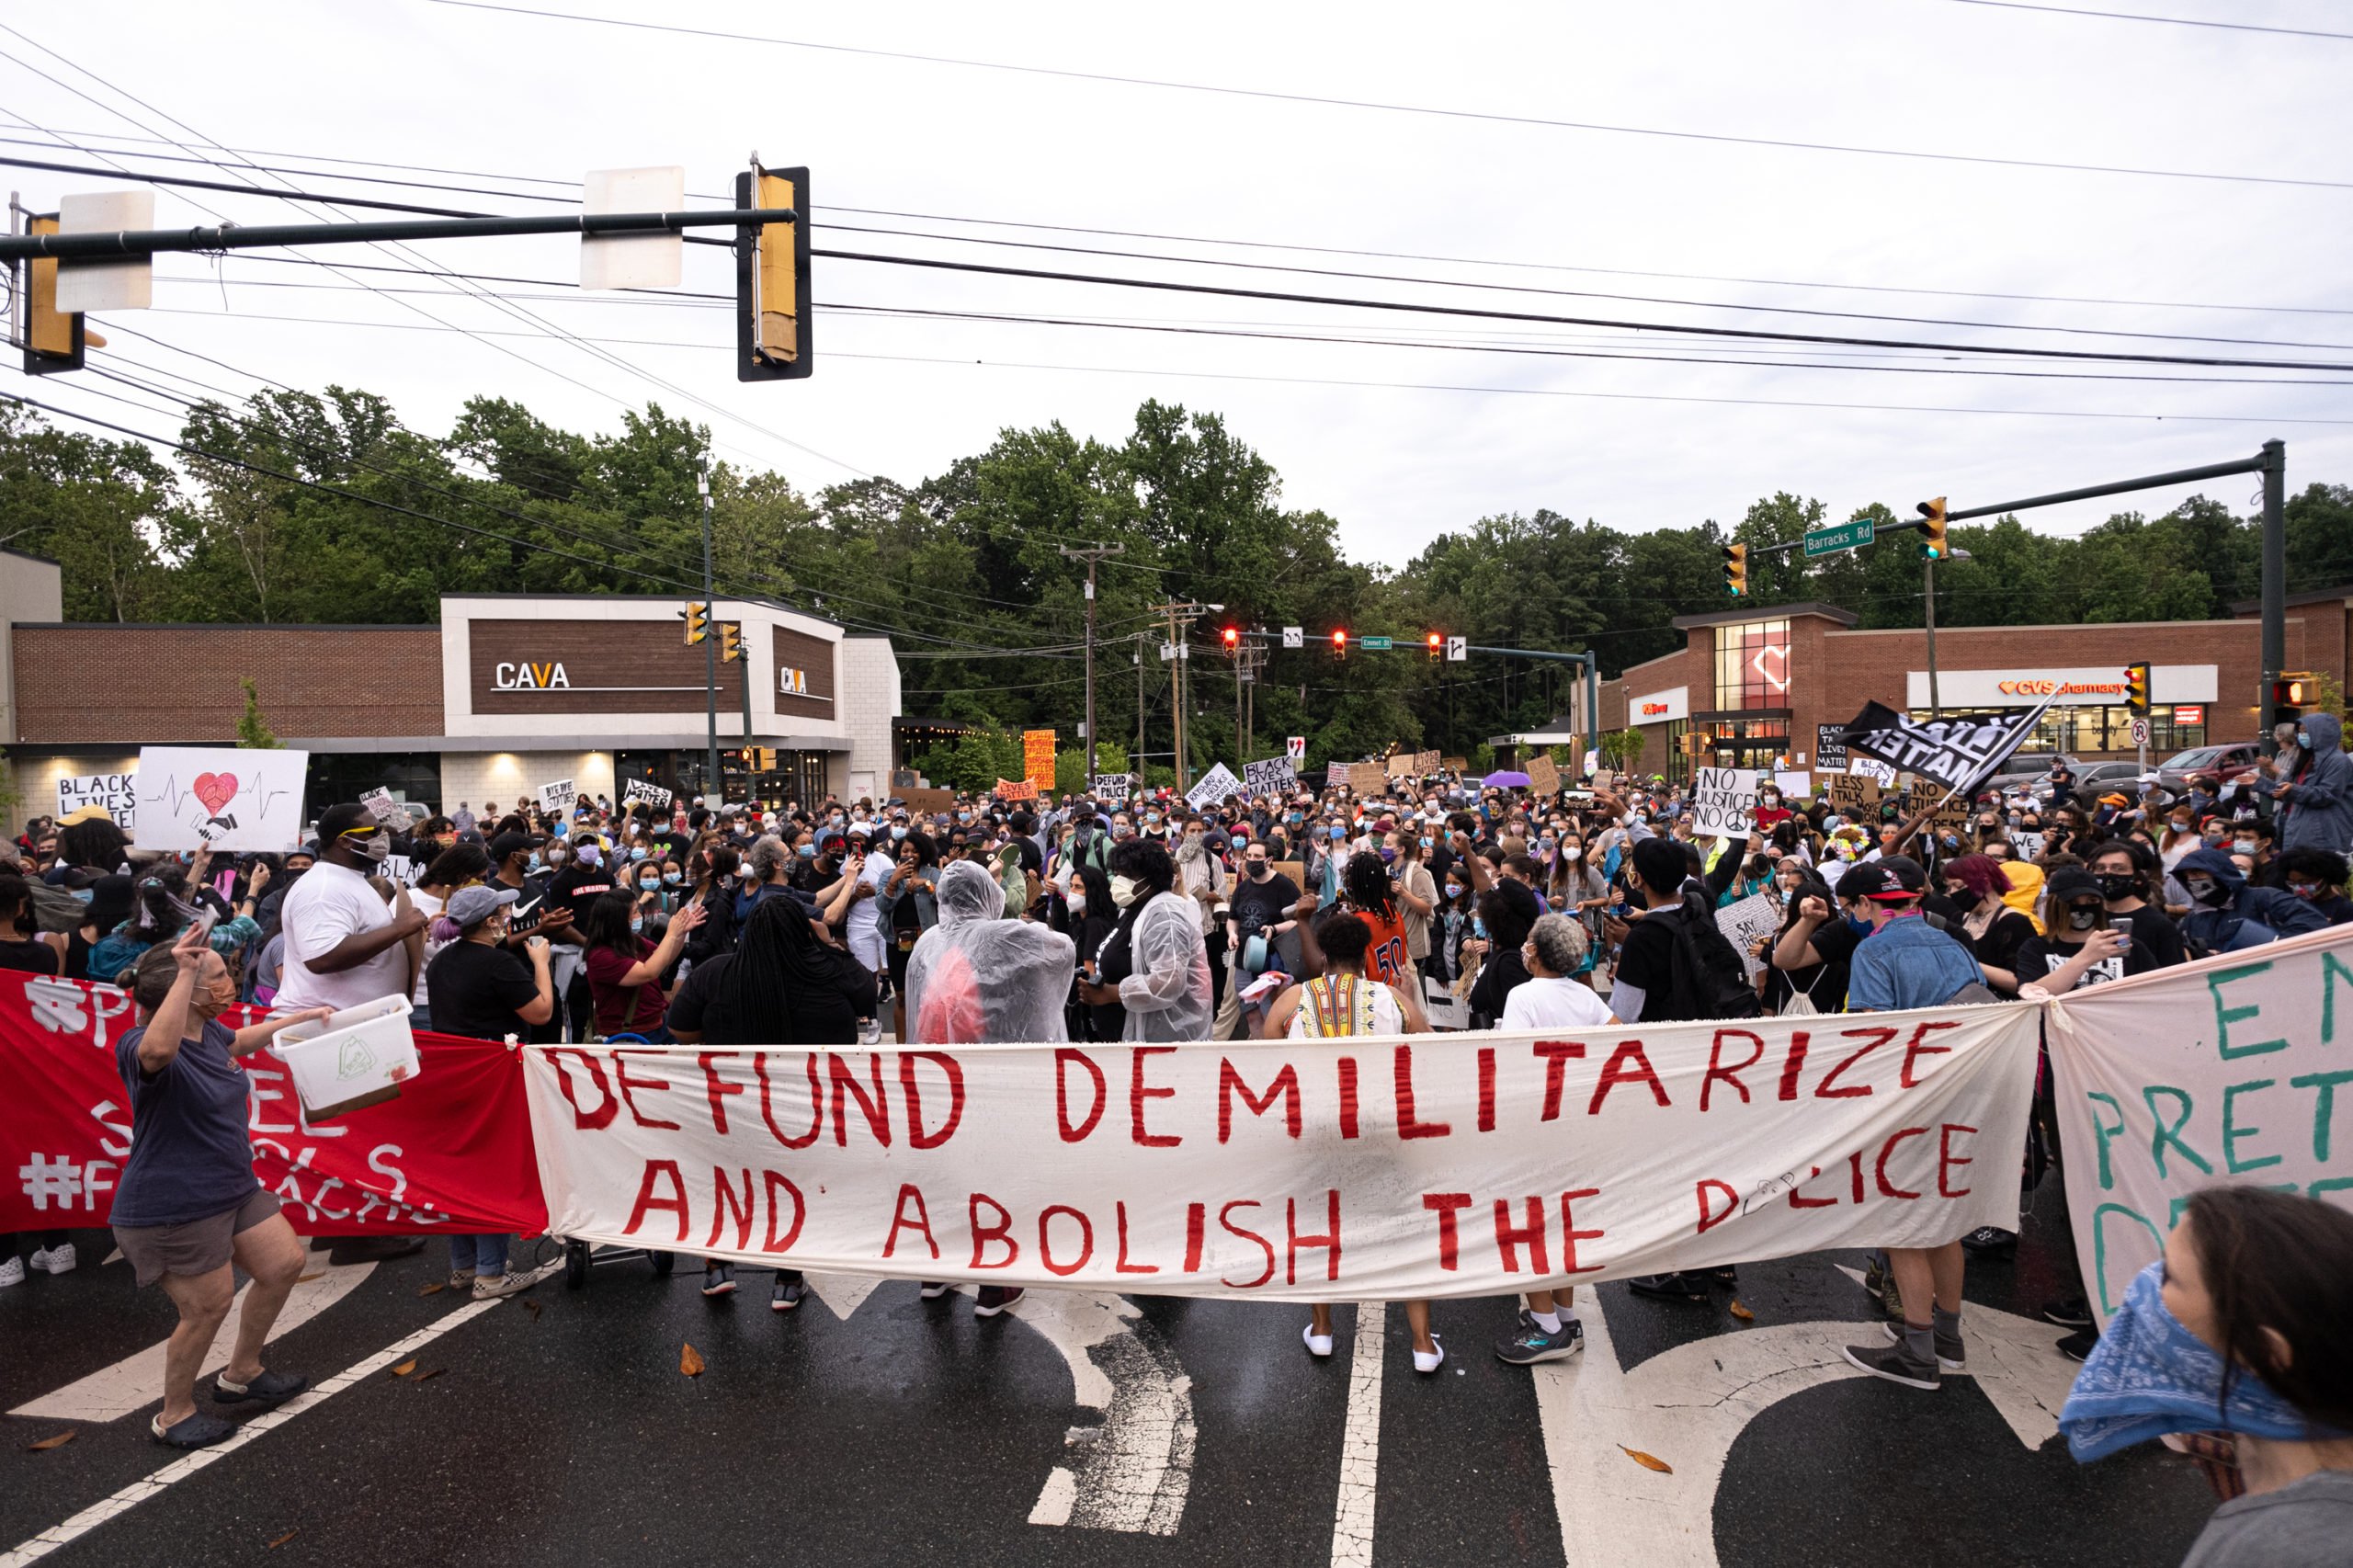 Protesters march in Charlottesville, Virginia on June 13, 2020. (Eze Amos/Getty Images)